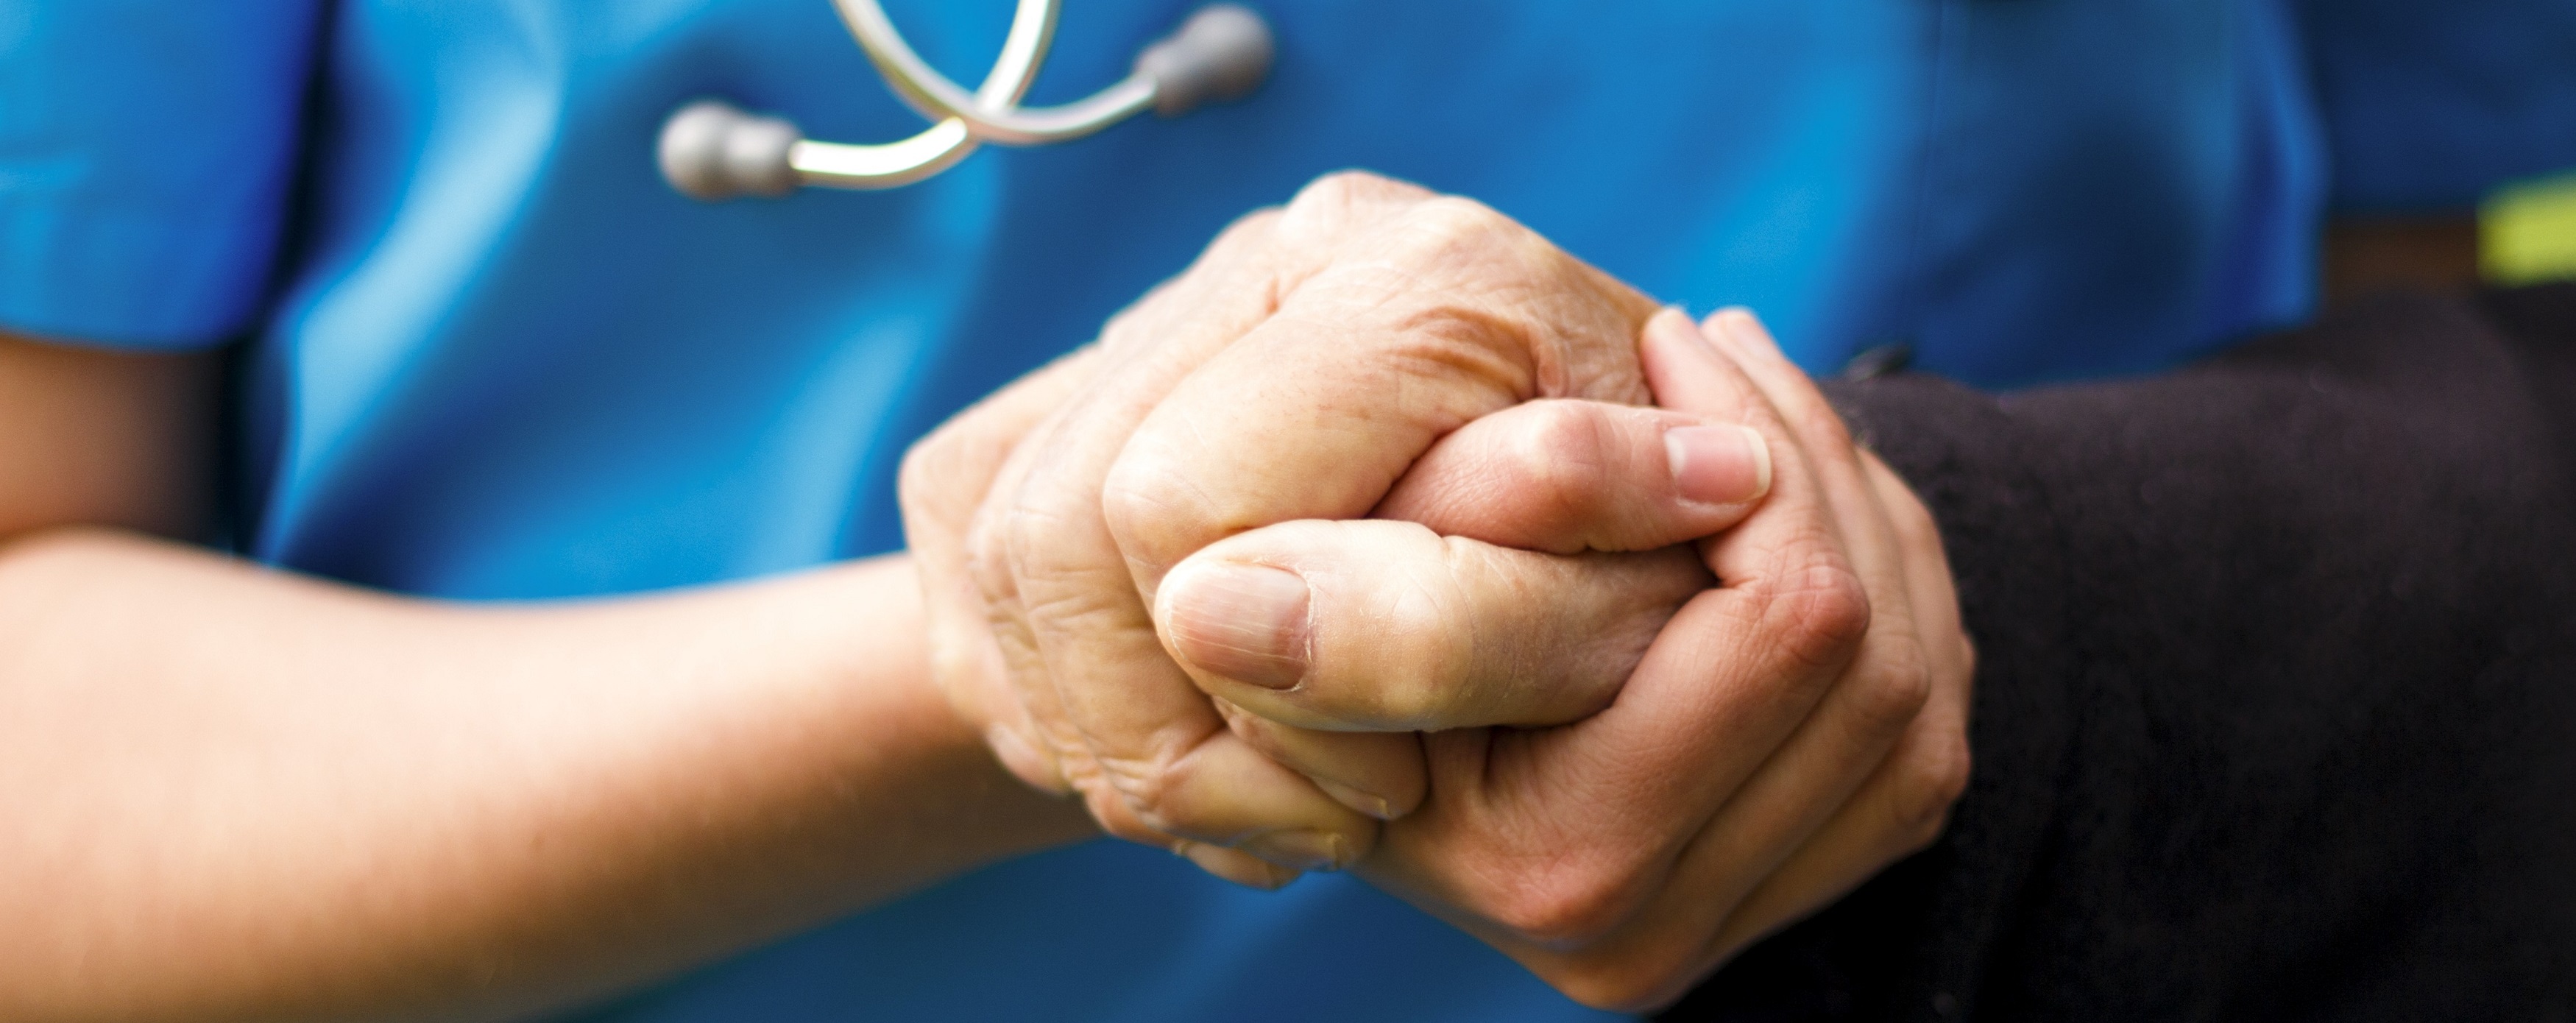 Nurse holding patients hand giving support